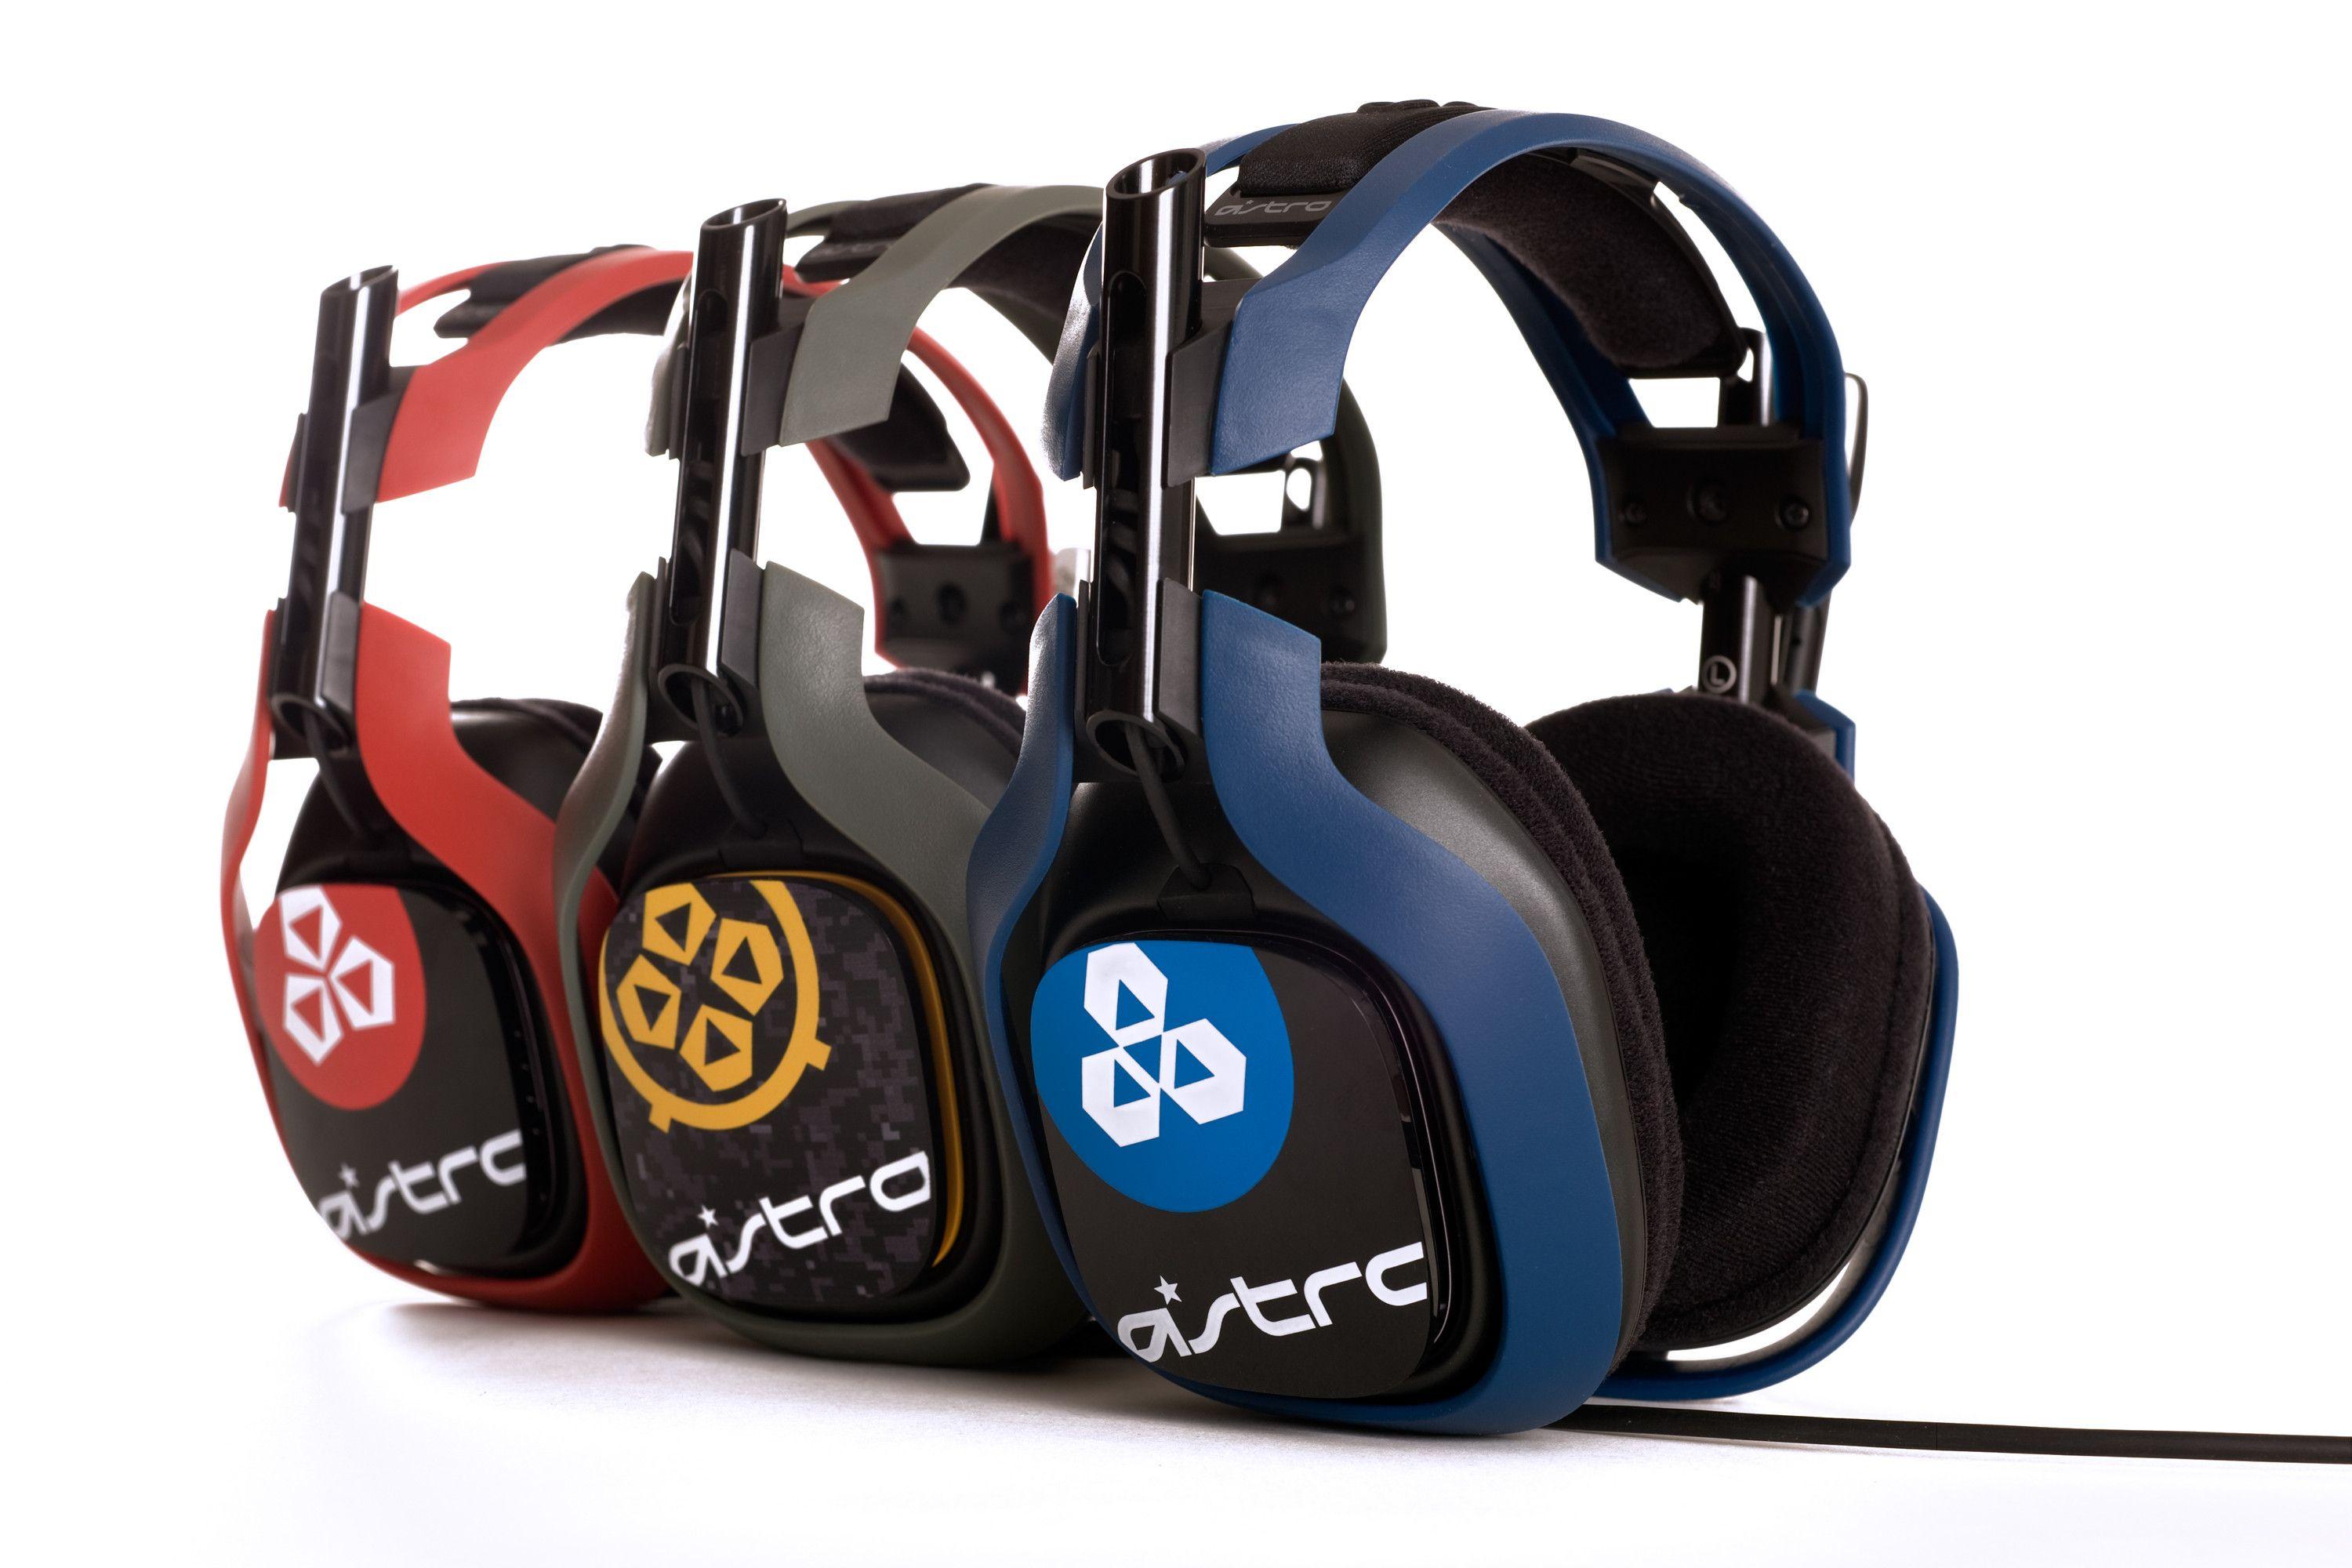 UPDATE] Astro Gaming audio package giveaway